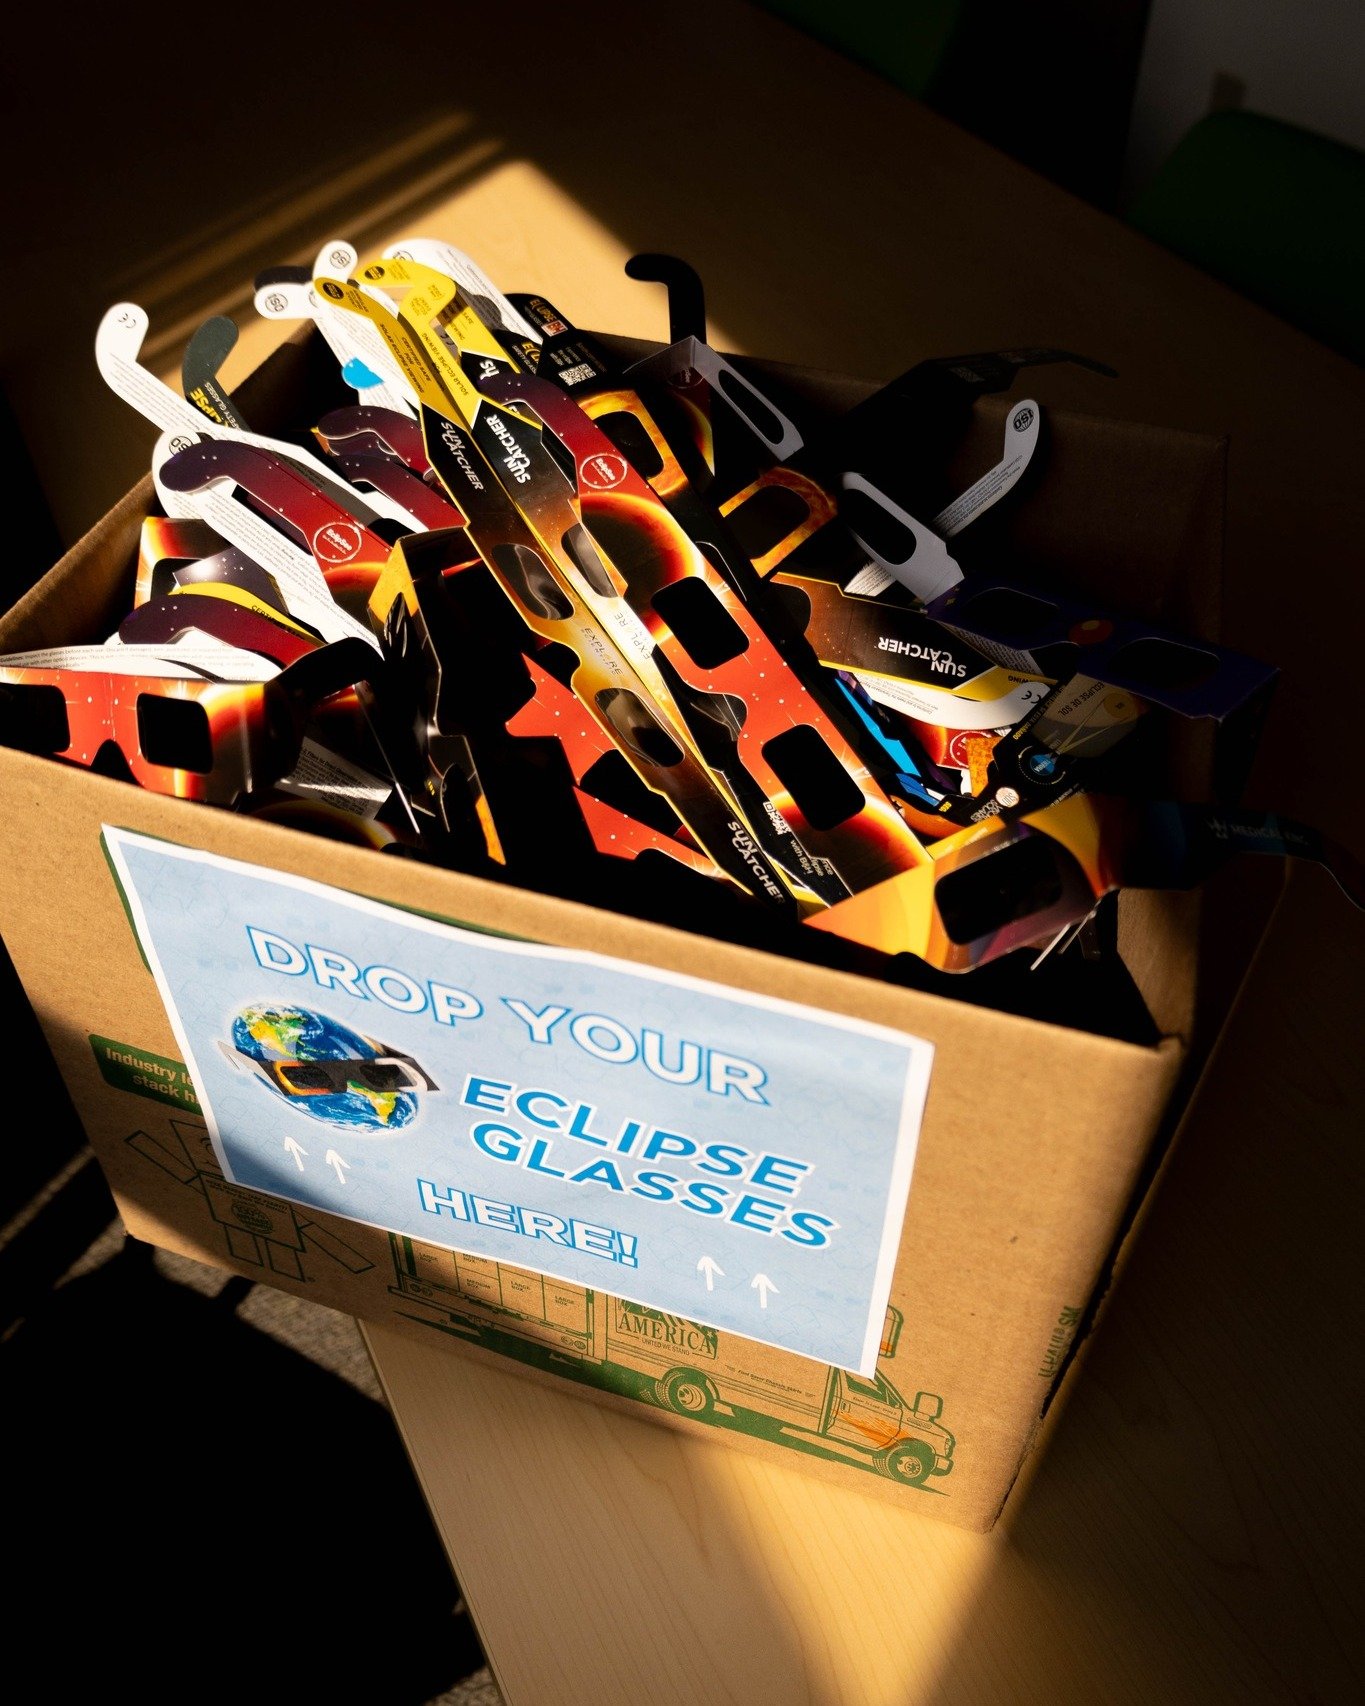 Across our 4 schools, ECS collected over 250 pairs of new and gently used eclipse glasses! 🌕👓☀️

We will be donating them to a collection group in Latin America for their upcoming eclipse in October. #GrowingCitizens